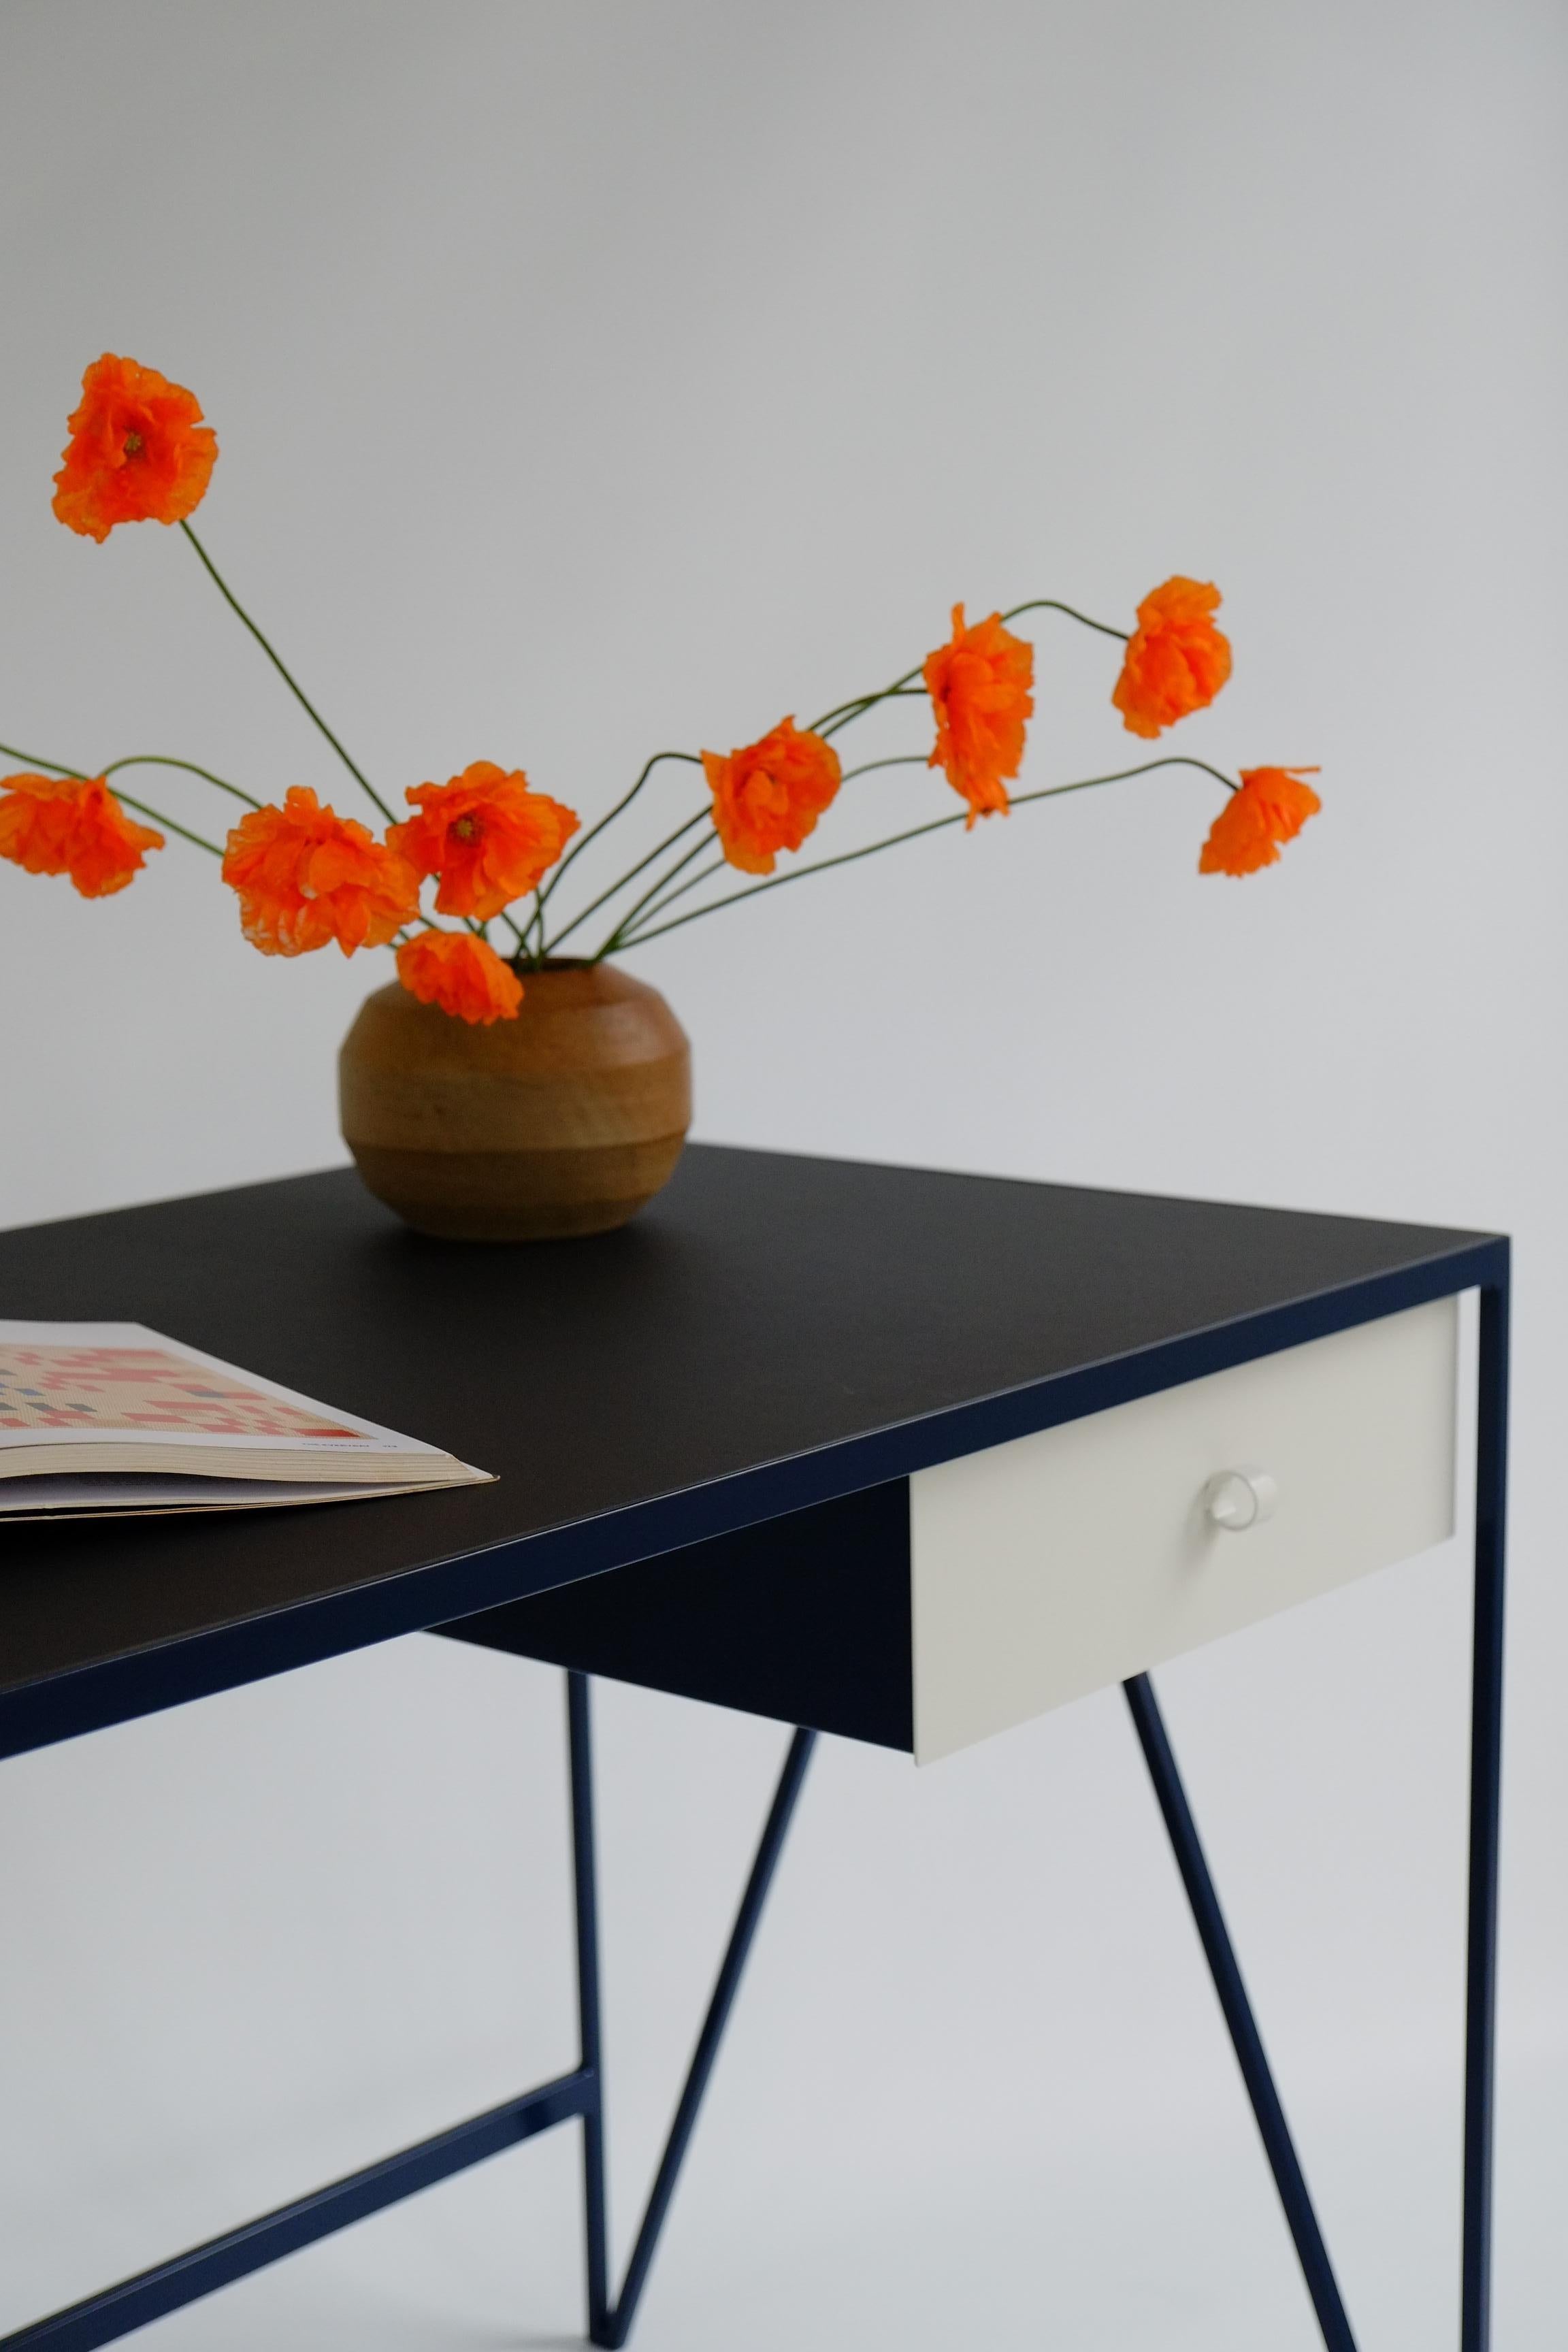 This large two-tone study desk is made with a powder-coated steel frame and a beautiful natural linoleum top made out of linseed oil. This modern minimal desk has two steel drawers suspended underneath the tabletop with our Loop handles. This desk